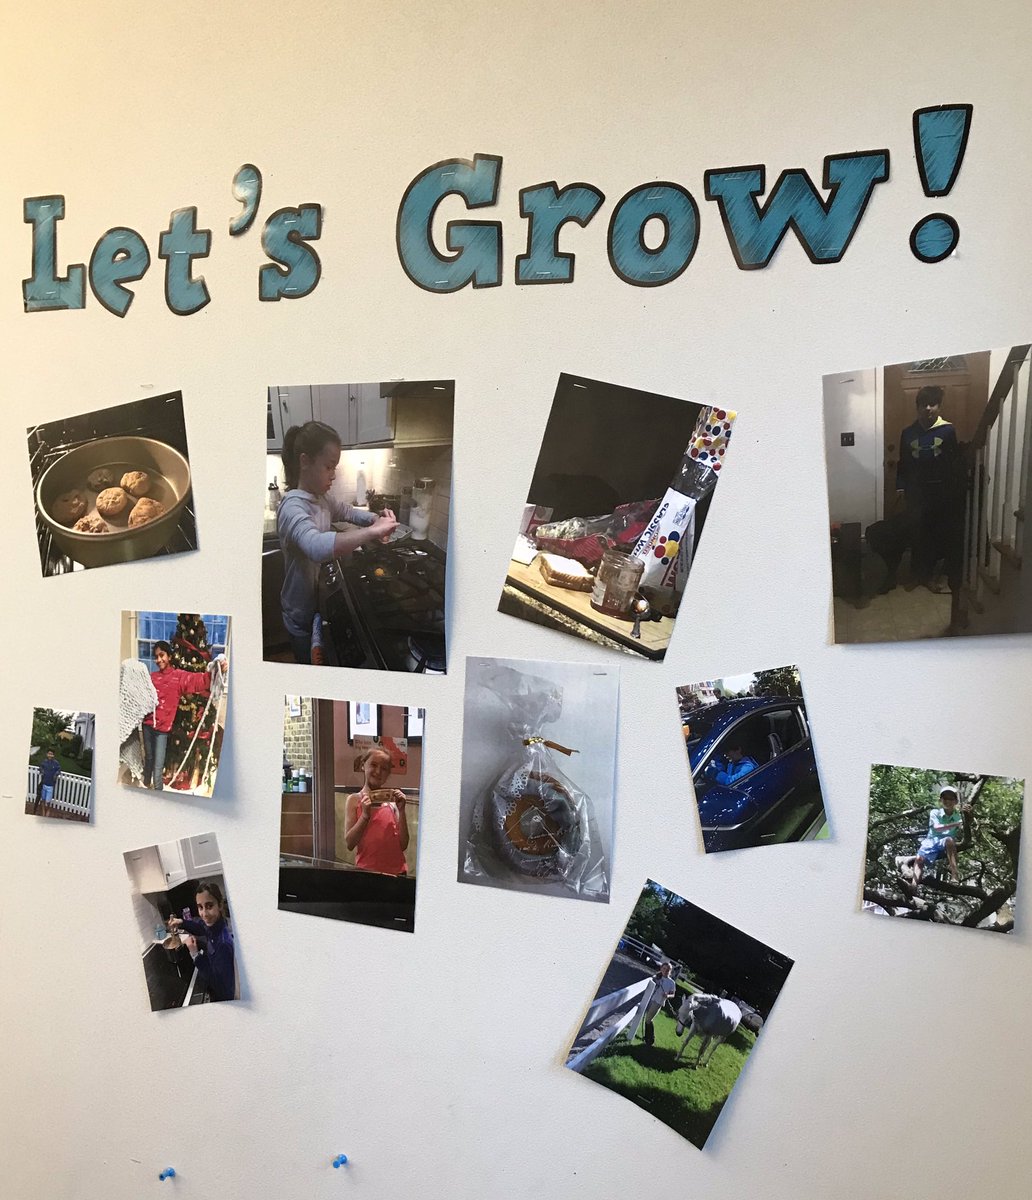 Collecting some great photos from the Let Grow project! #wiltonWayCT